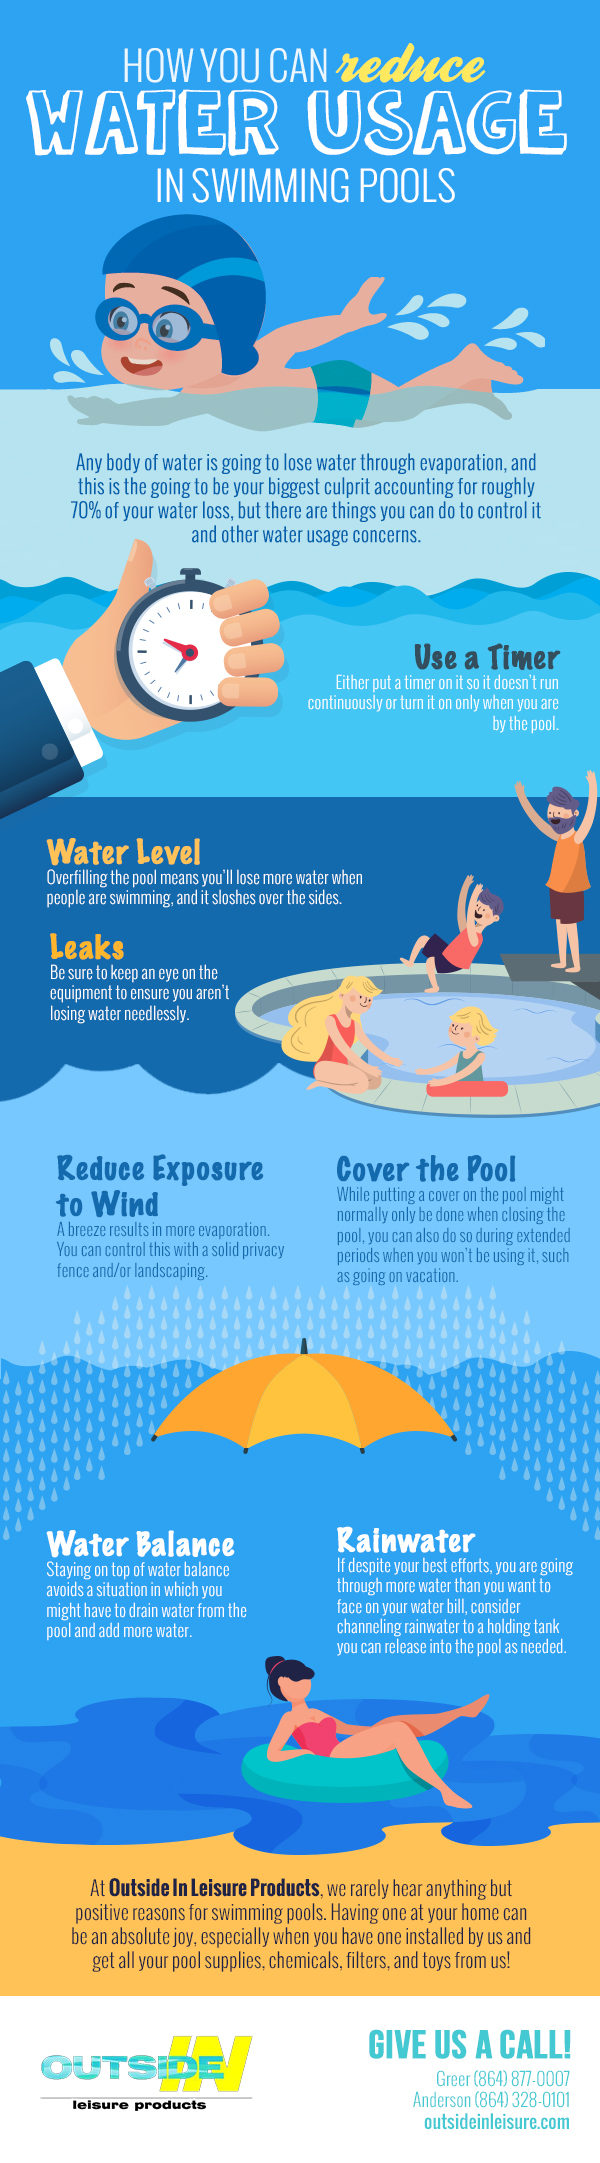 How you can reduce water usage in swimming pools